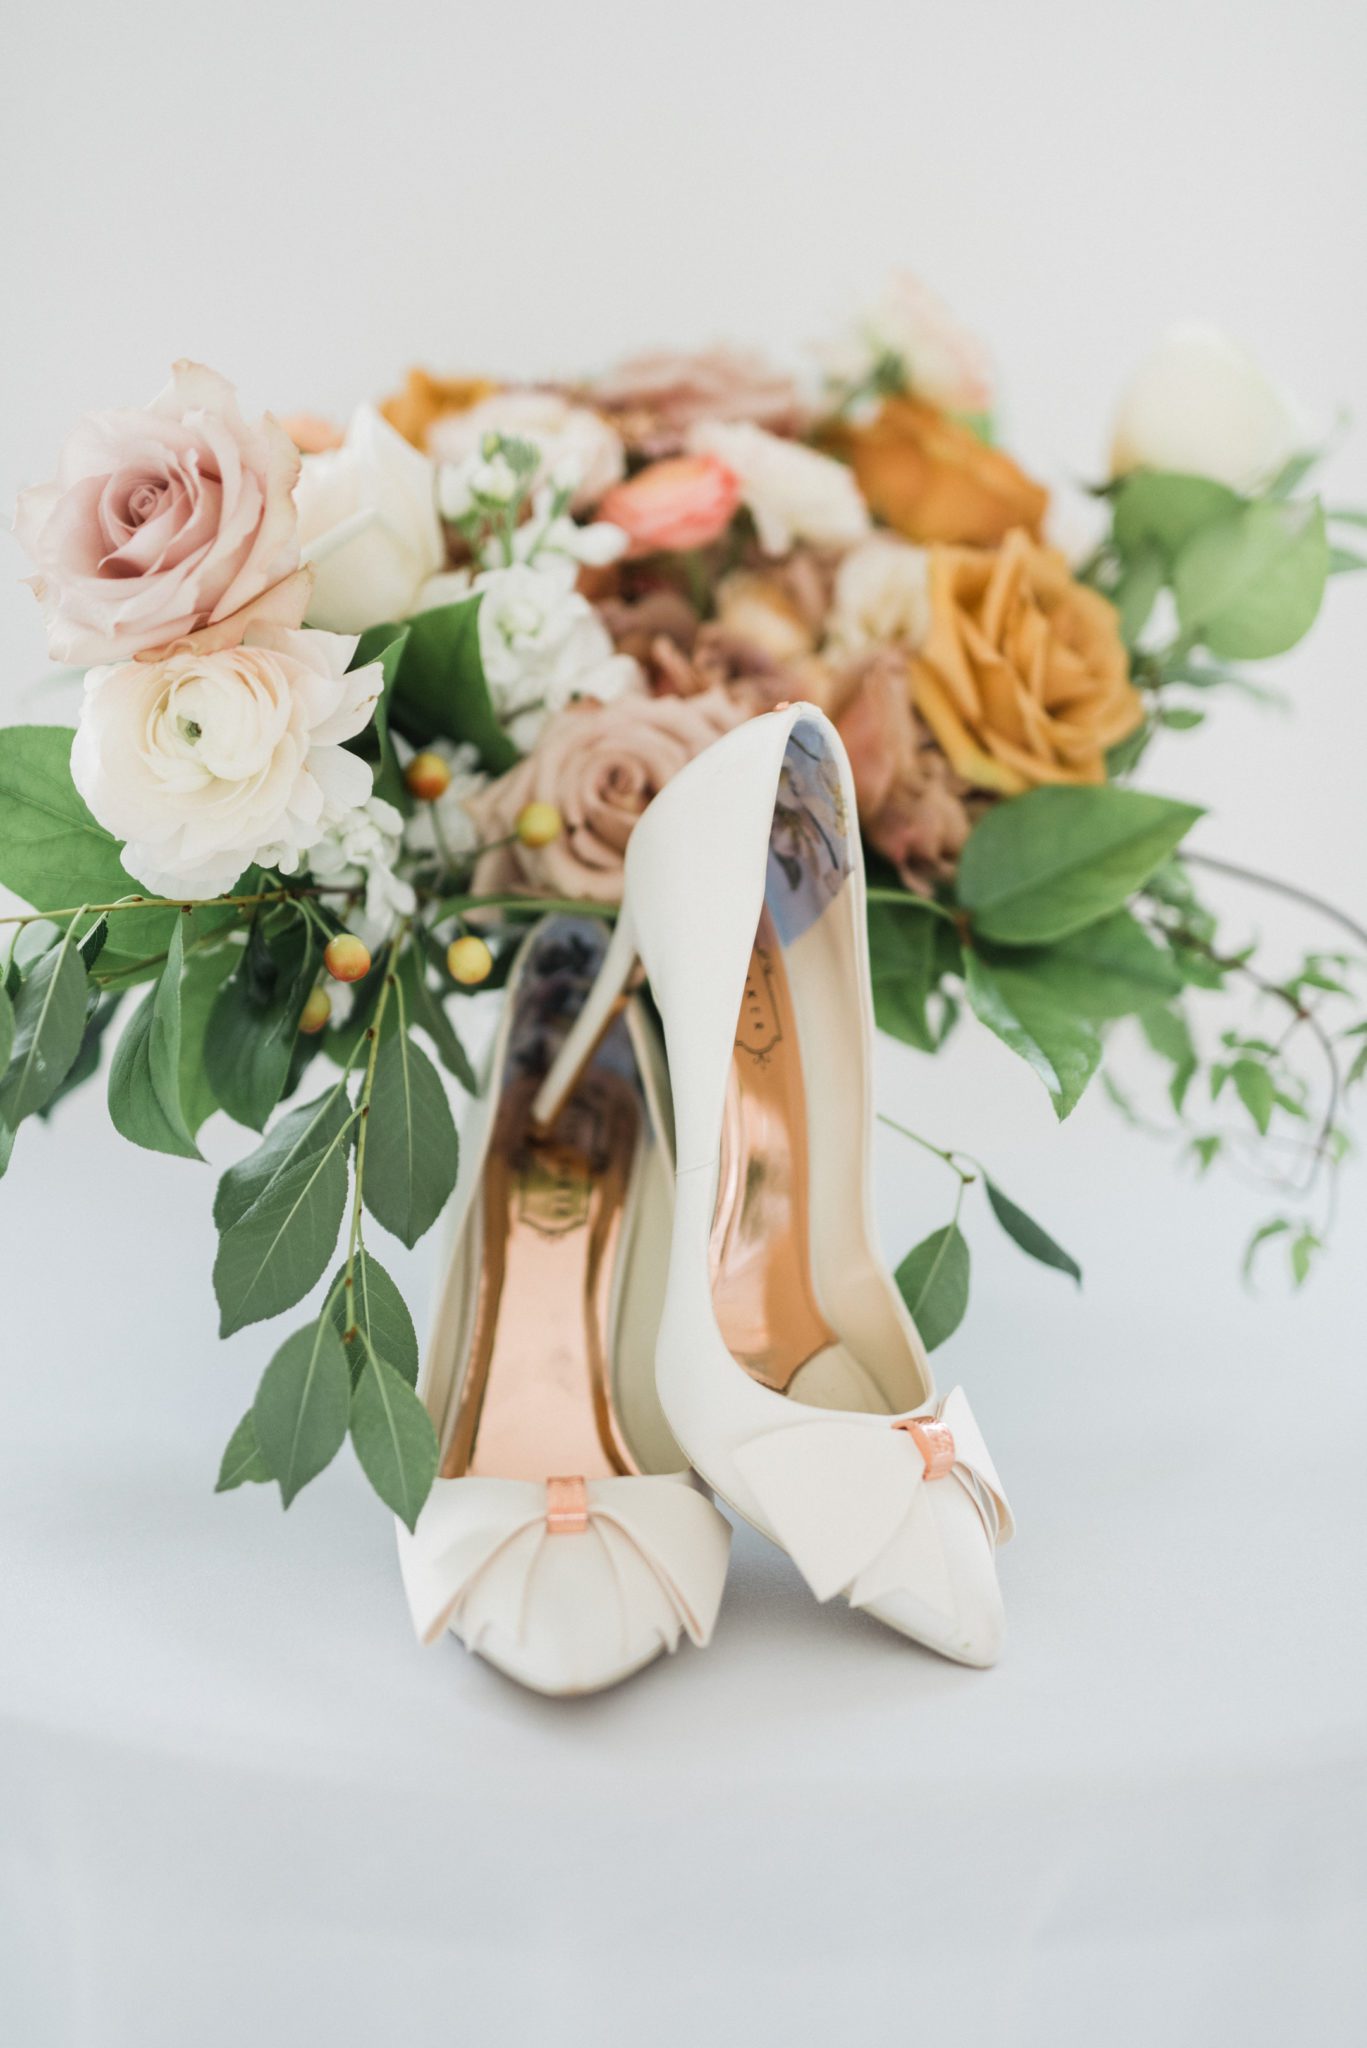 White bridal pumps with rose gold accents